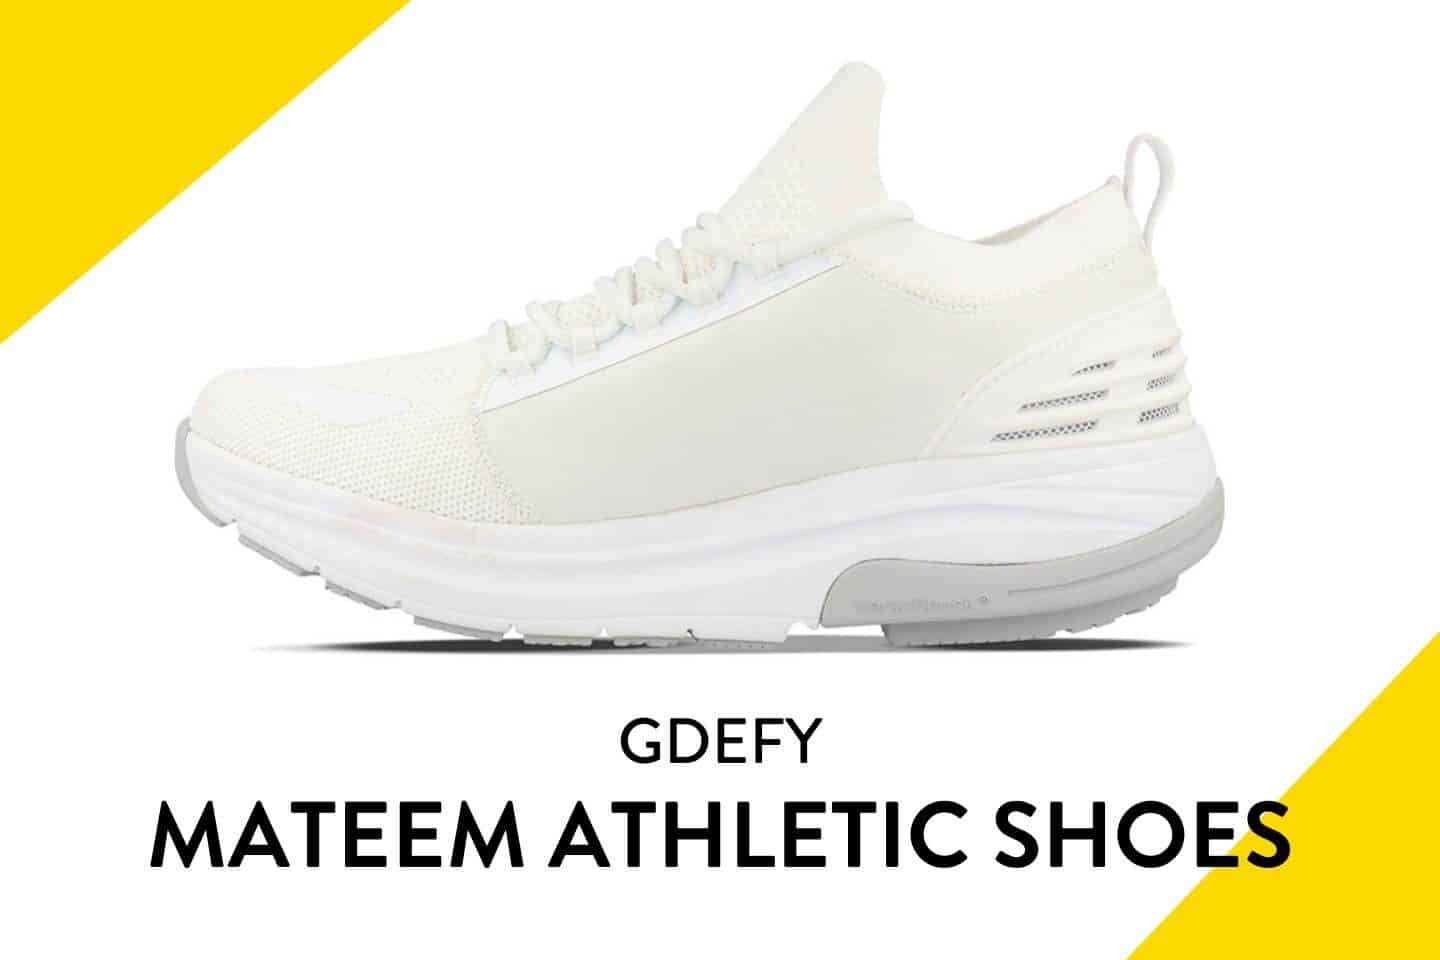 GDEFY MATeeM Athletic Shoes in white